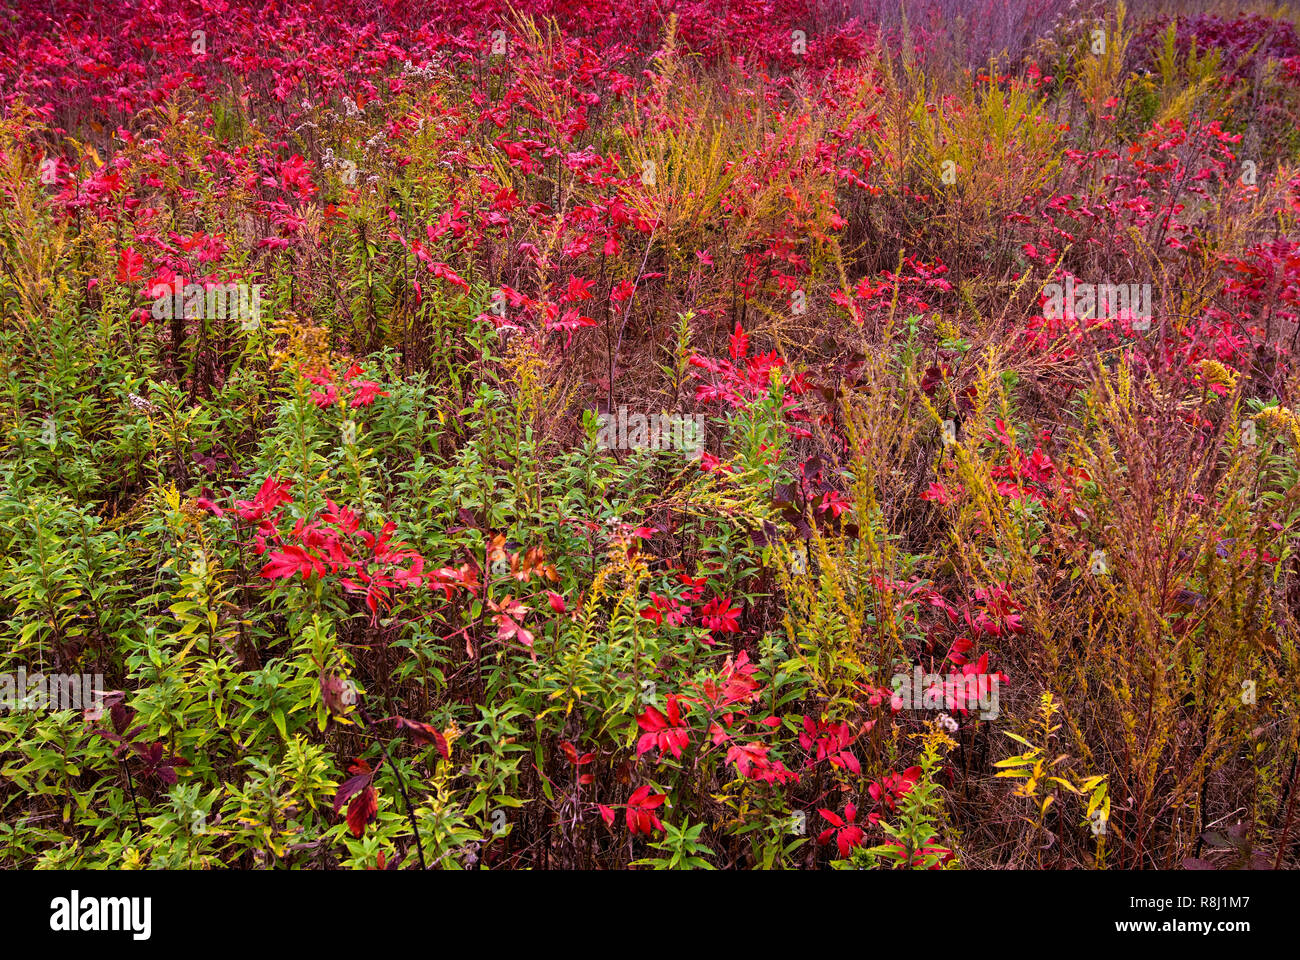 Winged sumac (Rhus copallina), goldenrod, and other plants in meadow in late October in central Virginia. Stock Photo